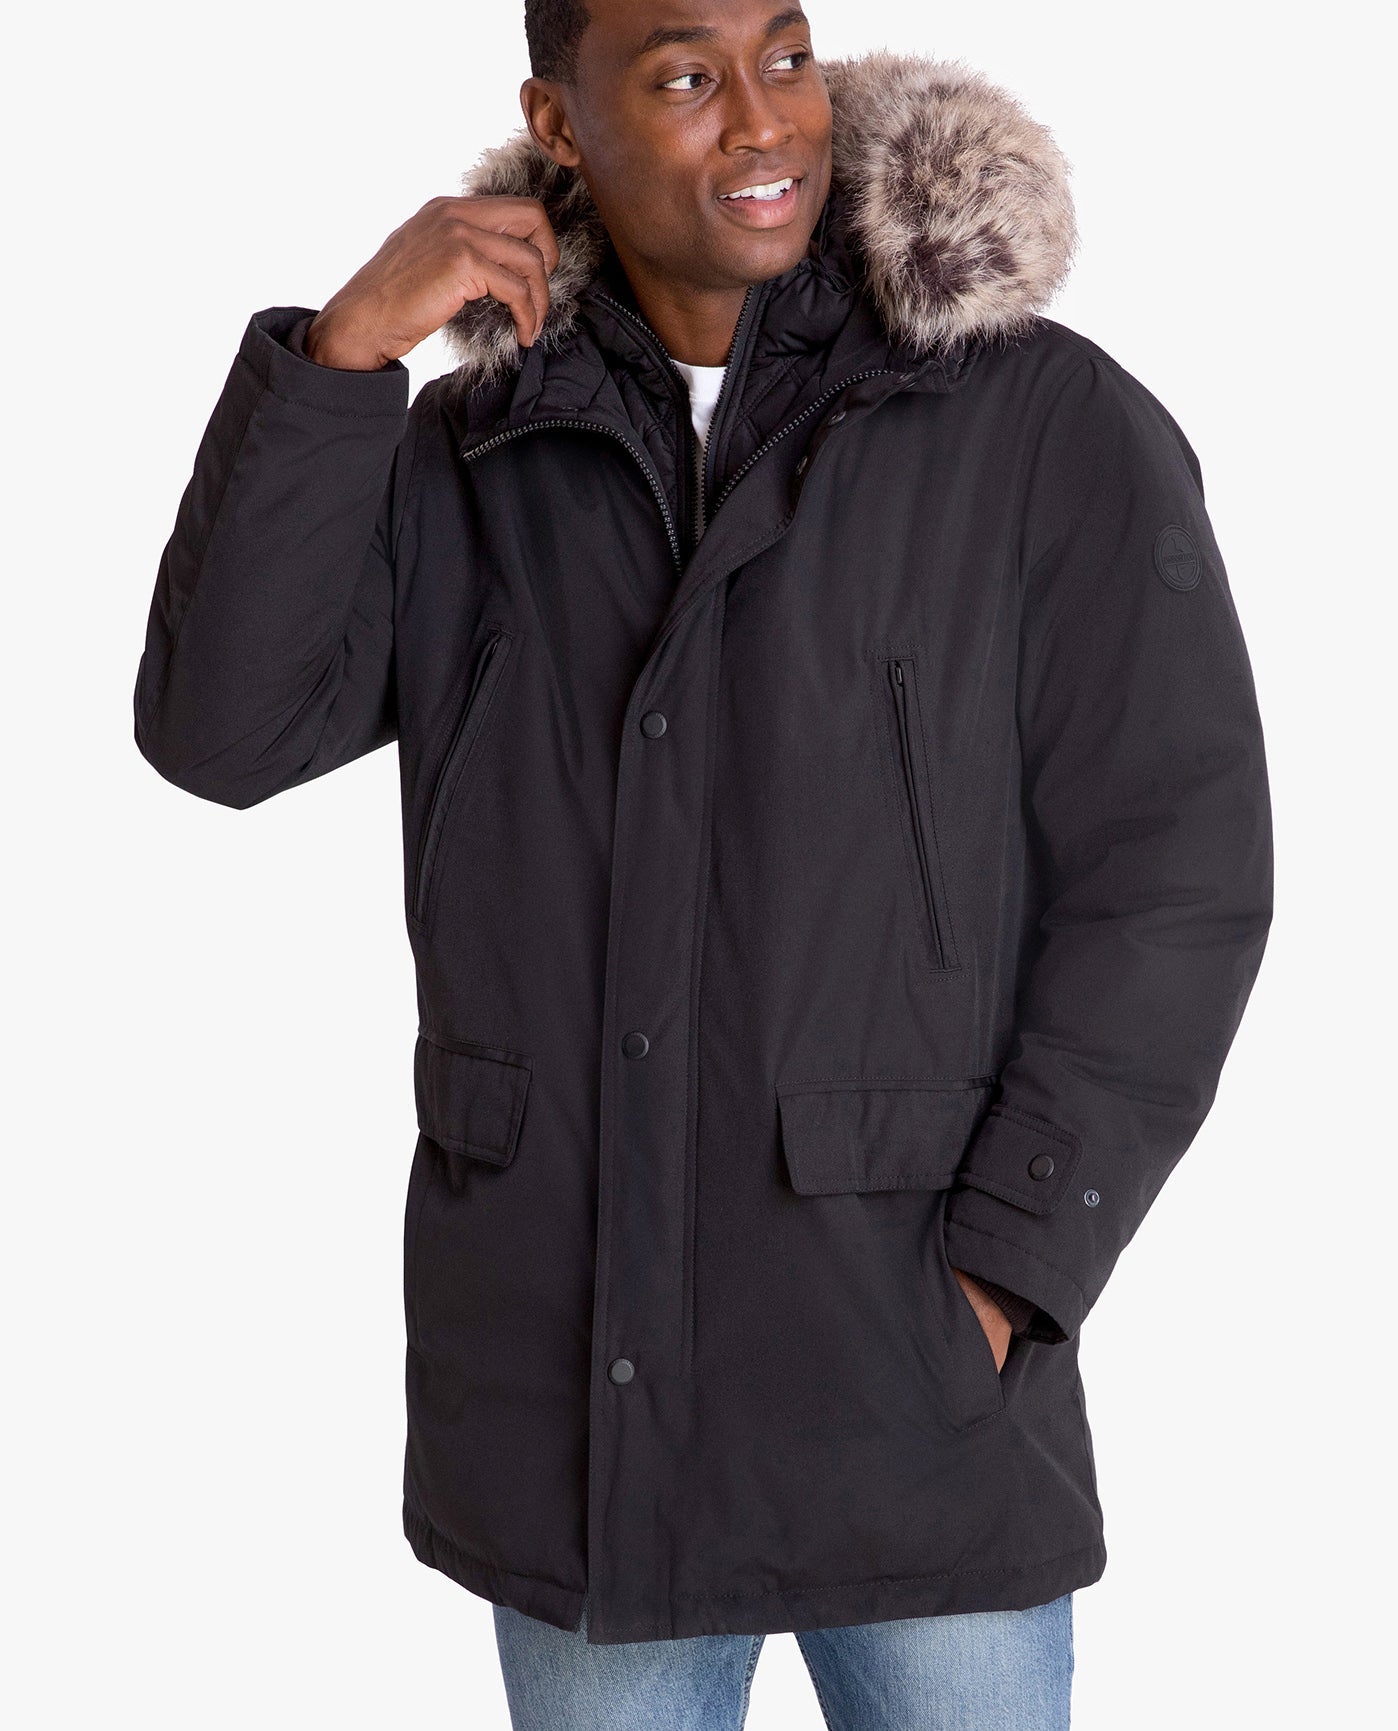 FRONT VIEW OF ARTIC PARKA WITH REMOVABLE FAUX FUR TRIMMED HOOD | BLACK